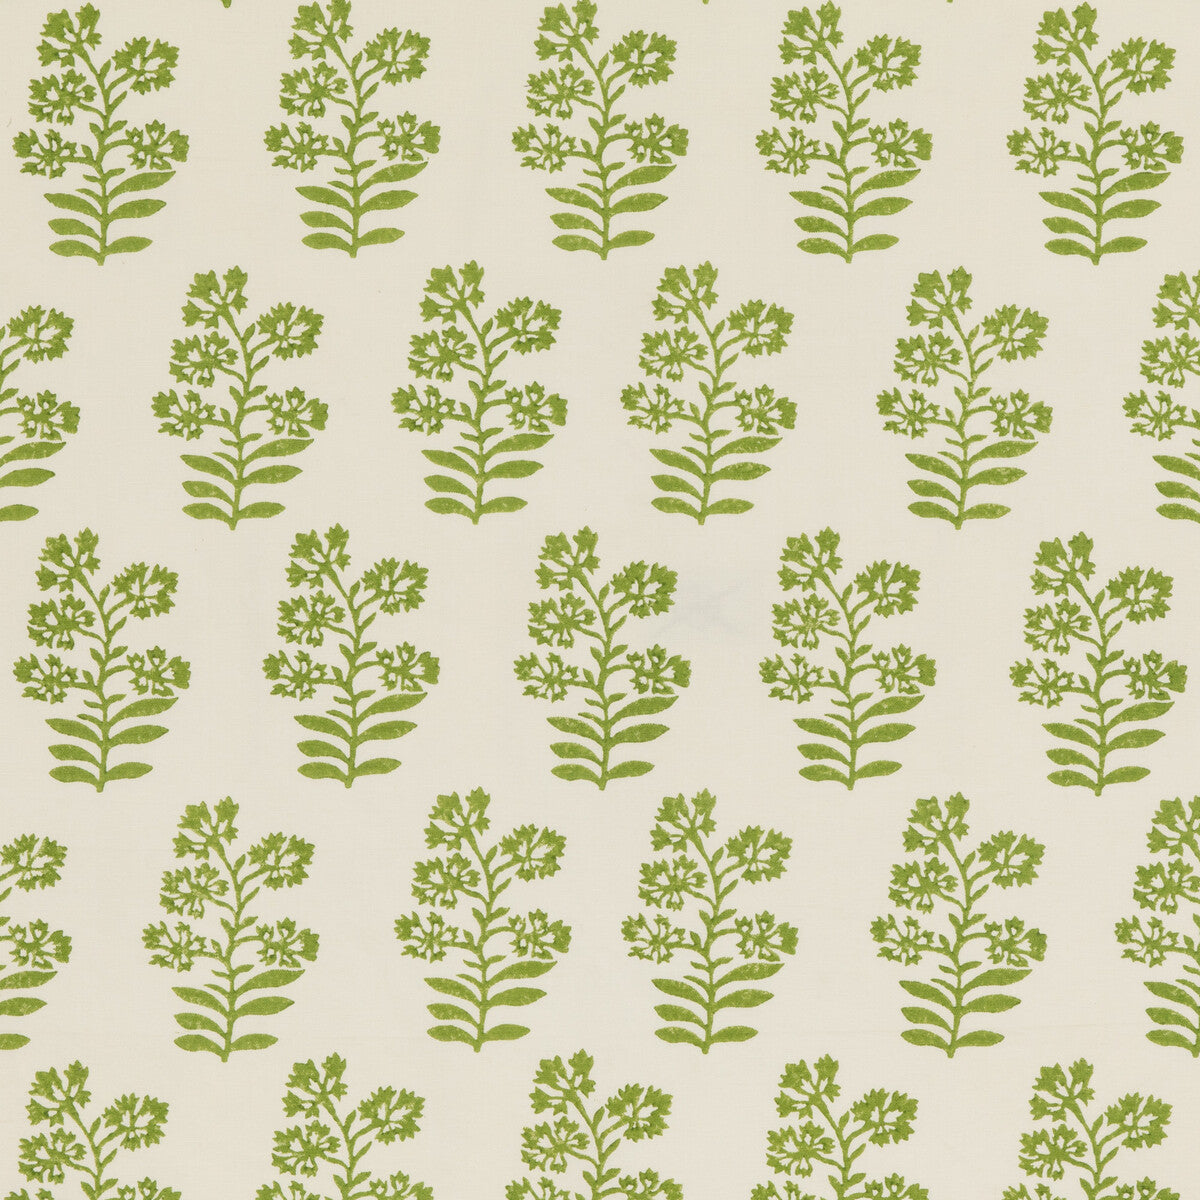 Wild Flower fabric in green color - pattern PP50483.5.0 - by Baker Lifestyle in the Block Party collection